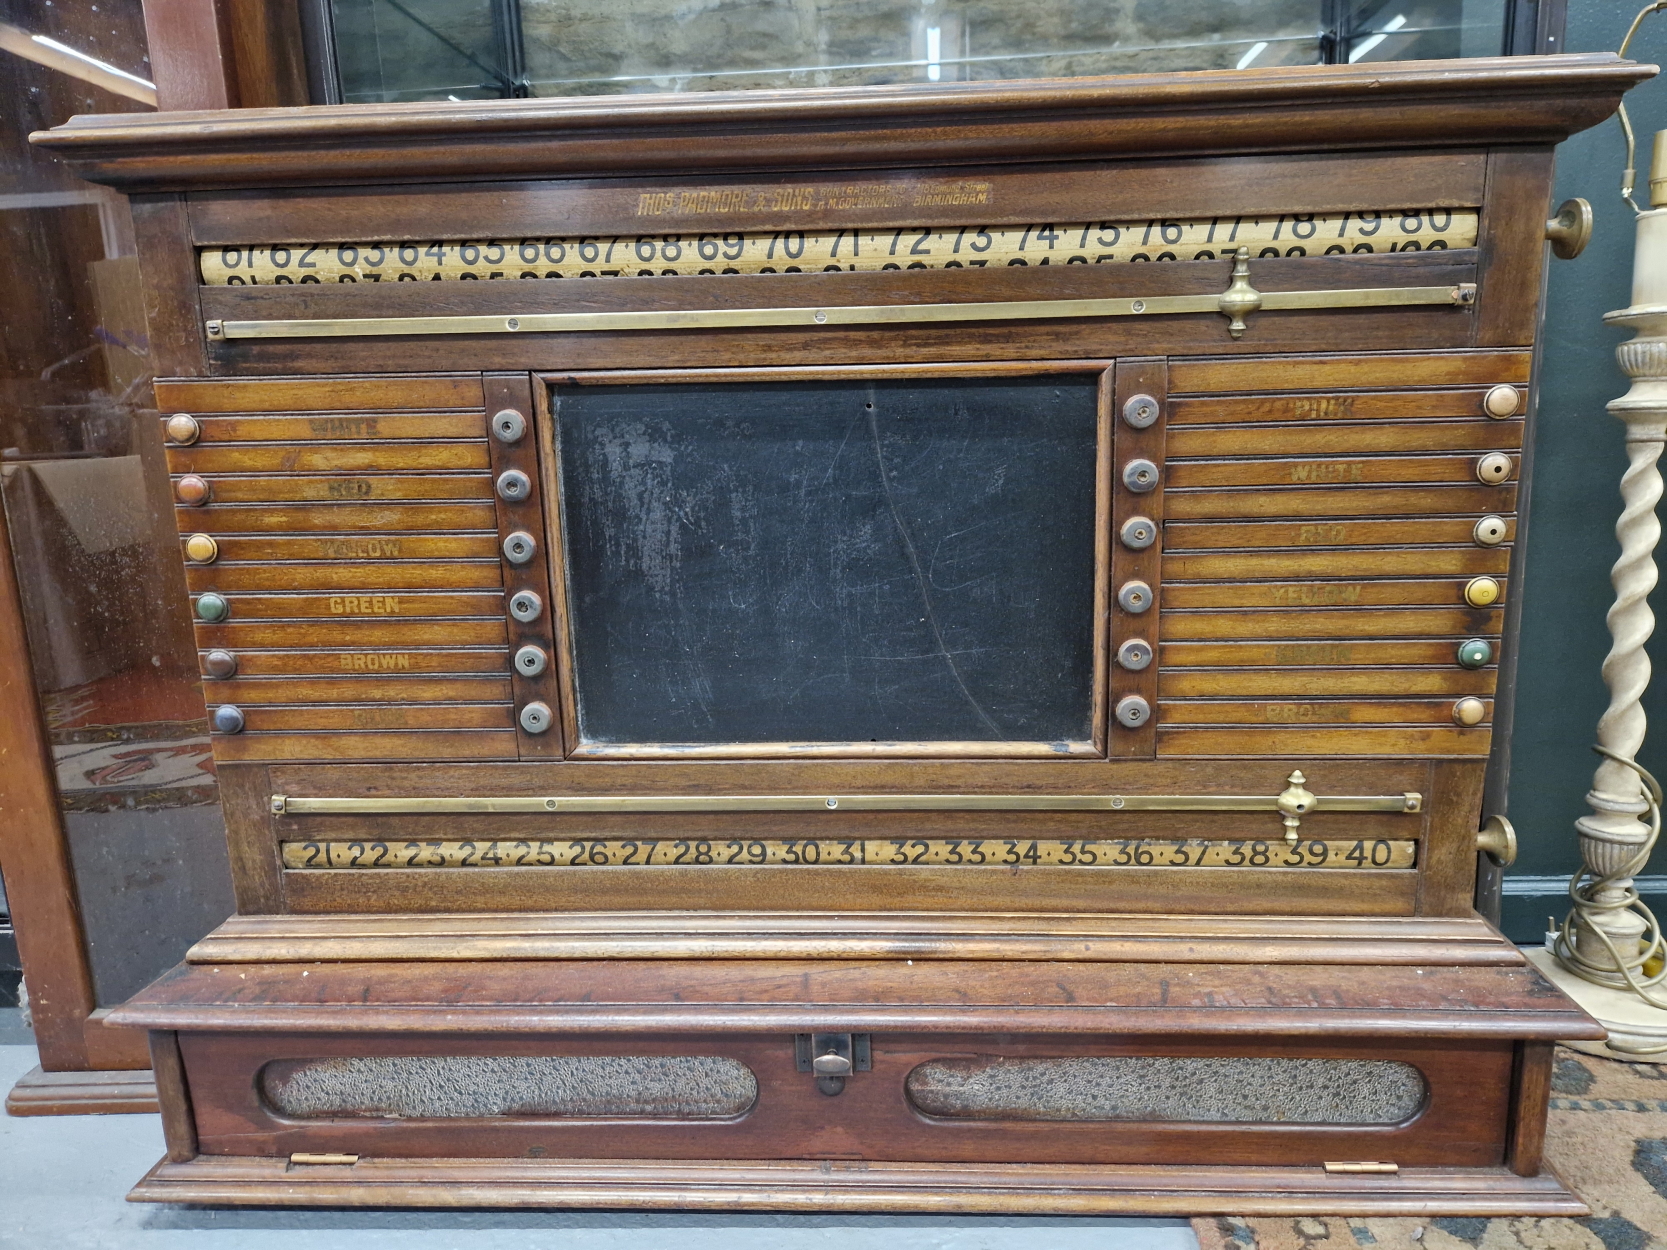 A MAHOHANY SNOOKER SCORE BOARD, WITH A CENTRAL BLACK BOARD AND A GLAZED PULL DOWN DOOR TO A